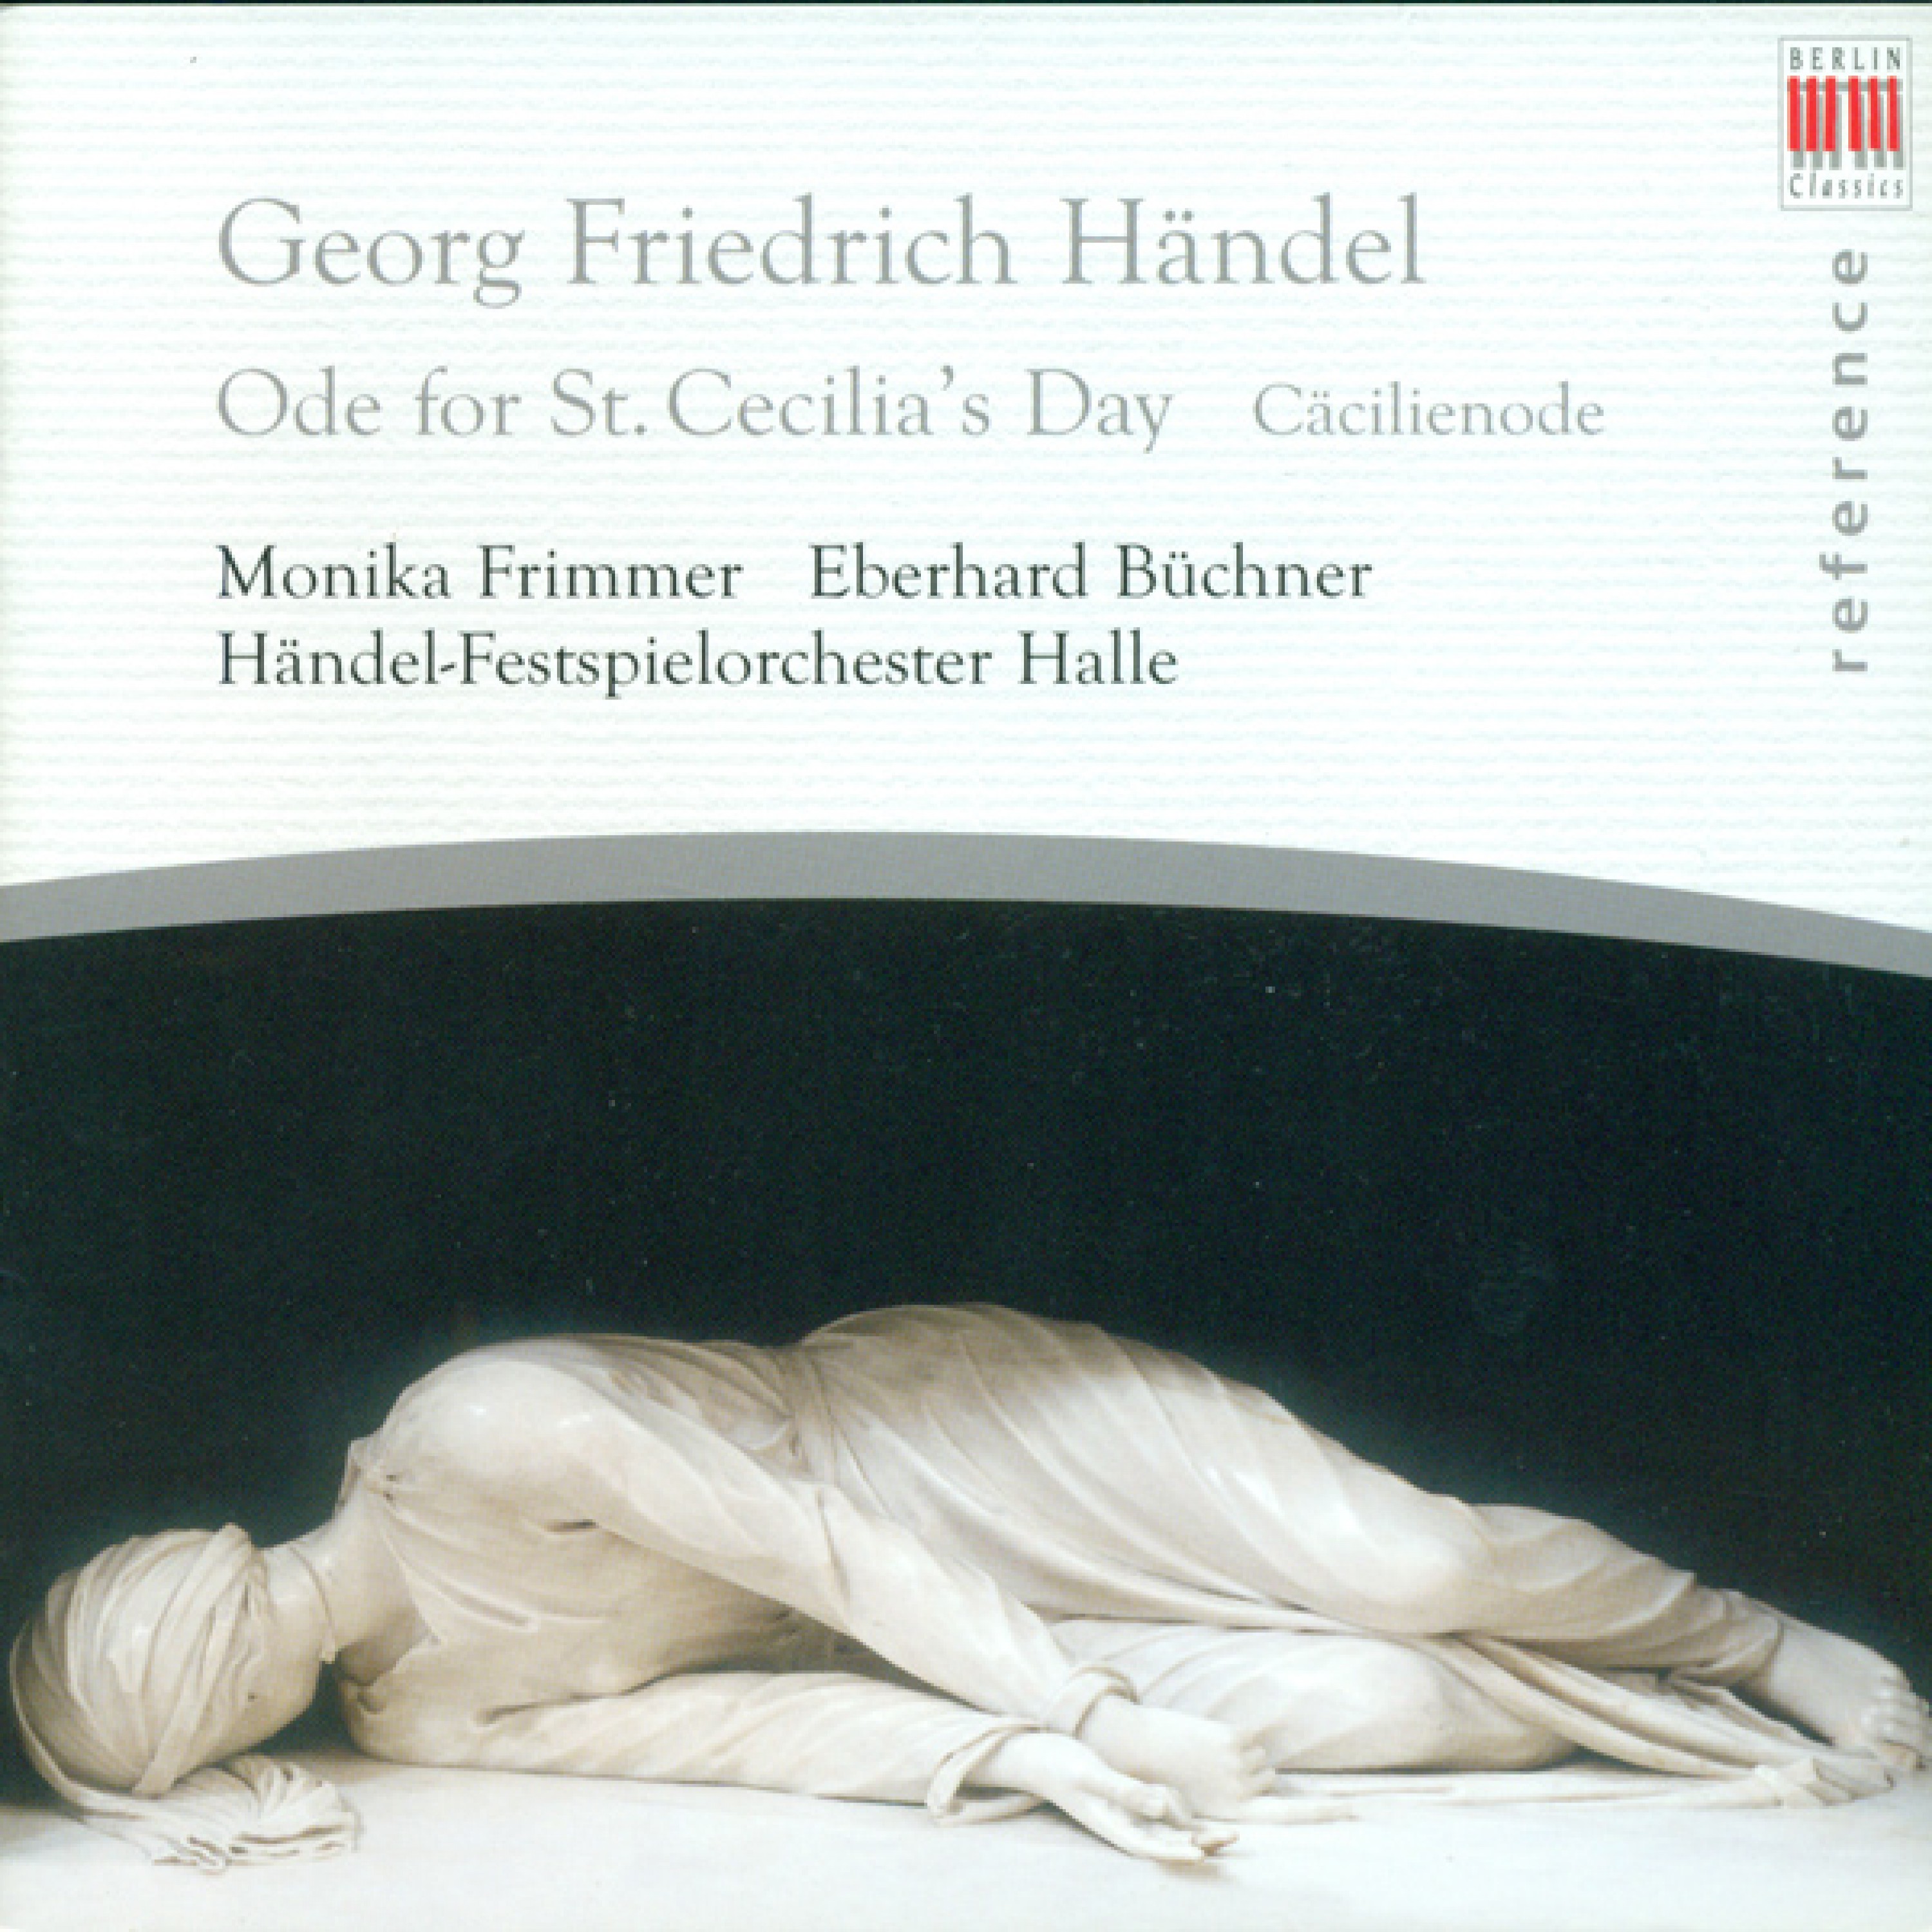 Ode for St. Cecilia's Day, HWV 76: Air "The soft complaining flute"